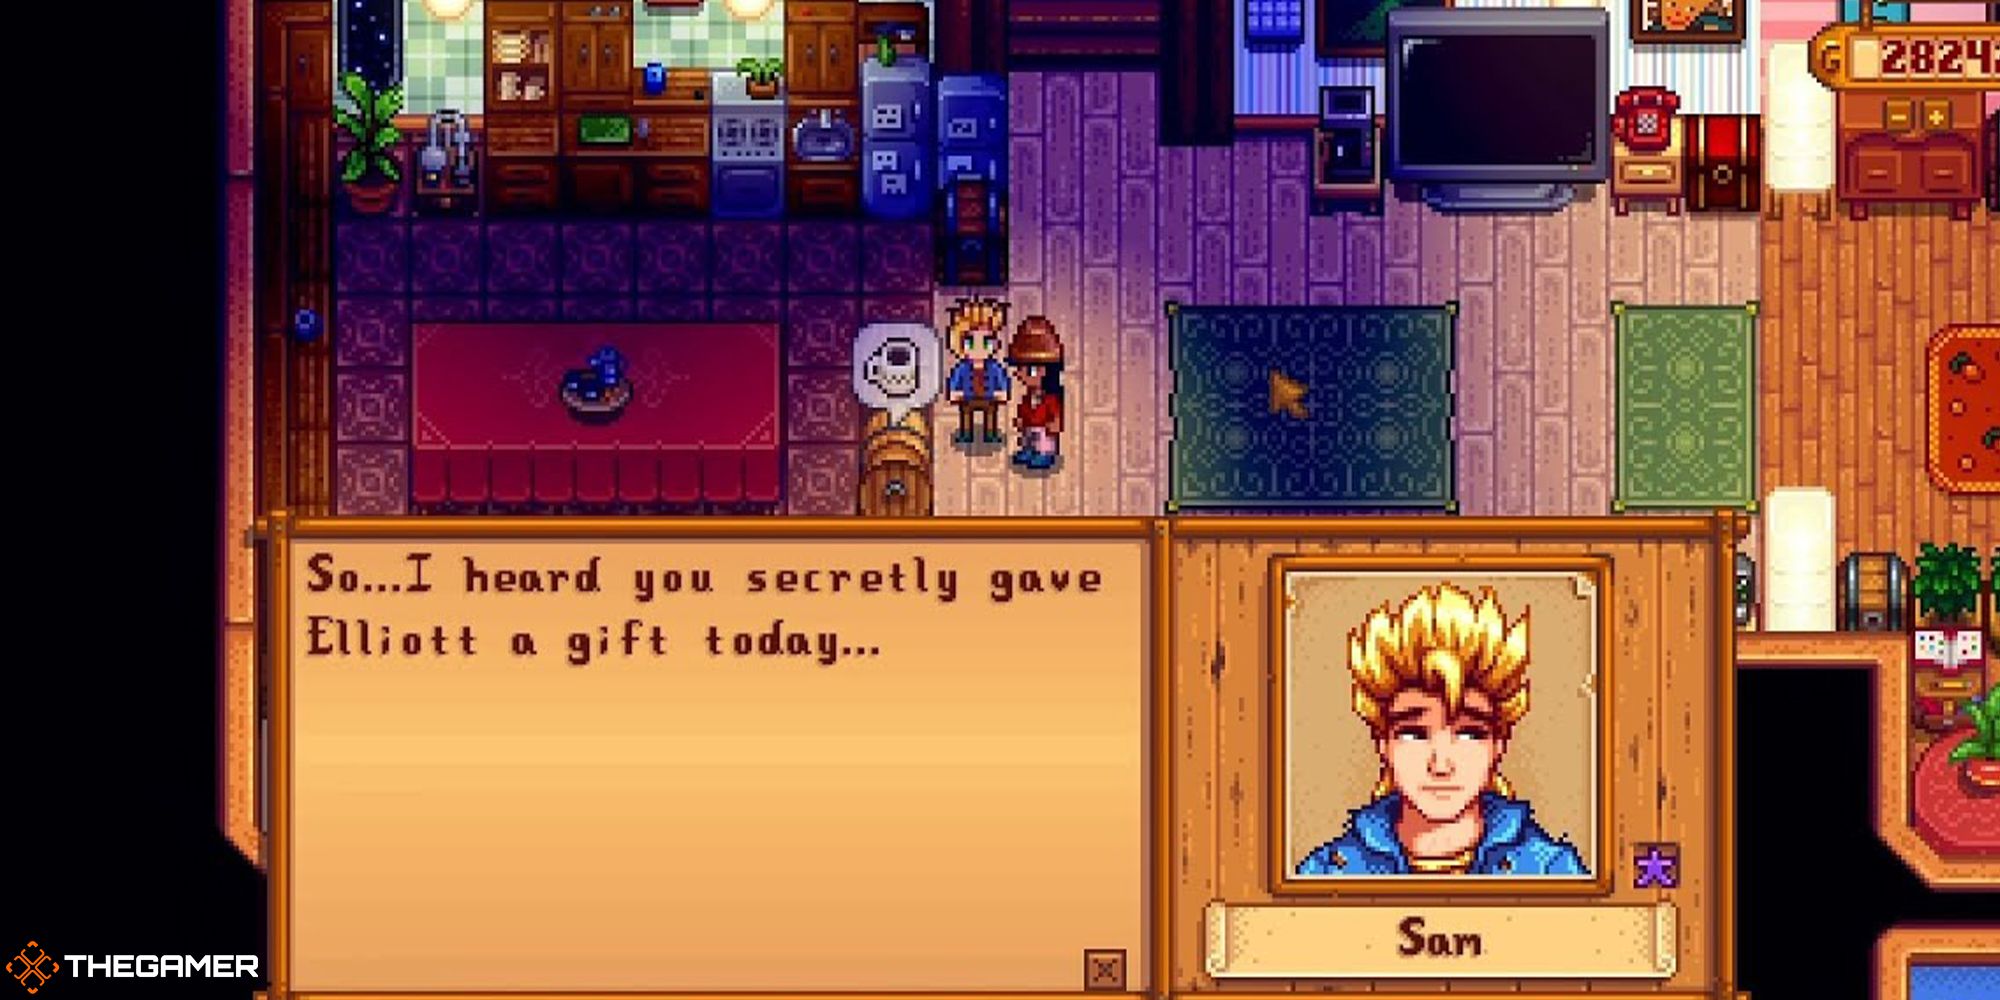 Stardew Valley - jealous spouse (sam) talking to the player